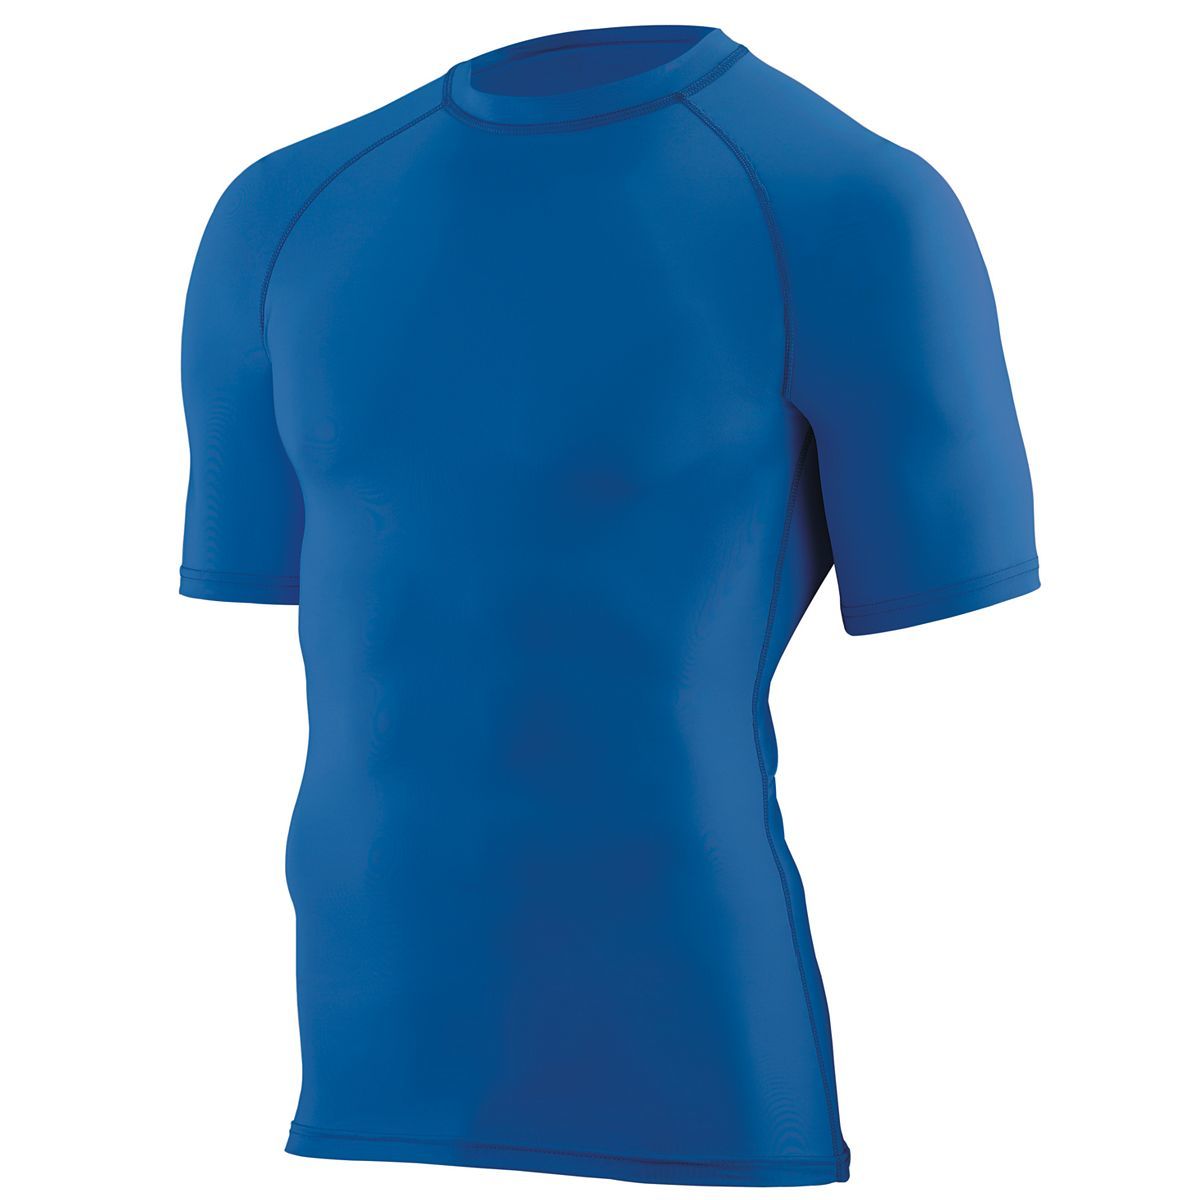 Augusta Sportswear Youth Hyperform Compression Short Sleeve Tee in Royal  -Part of the Youth, Youth-Tee-Shirt, T-Shirts, Augusta-Products, Shirts product lines at KanaleyCreations.com